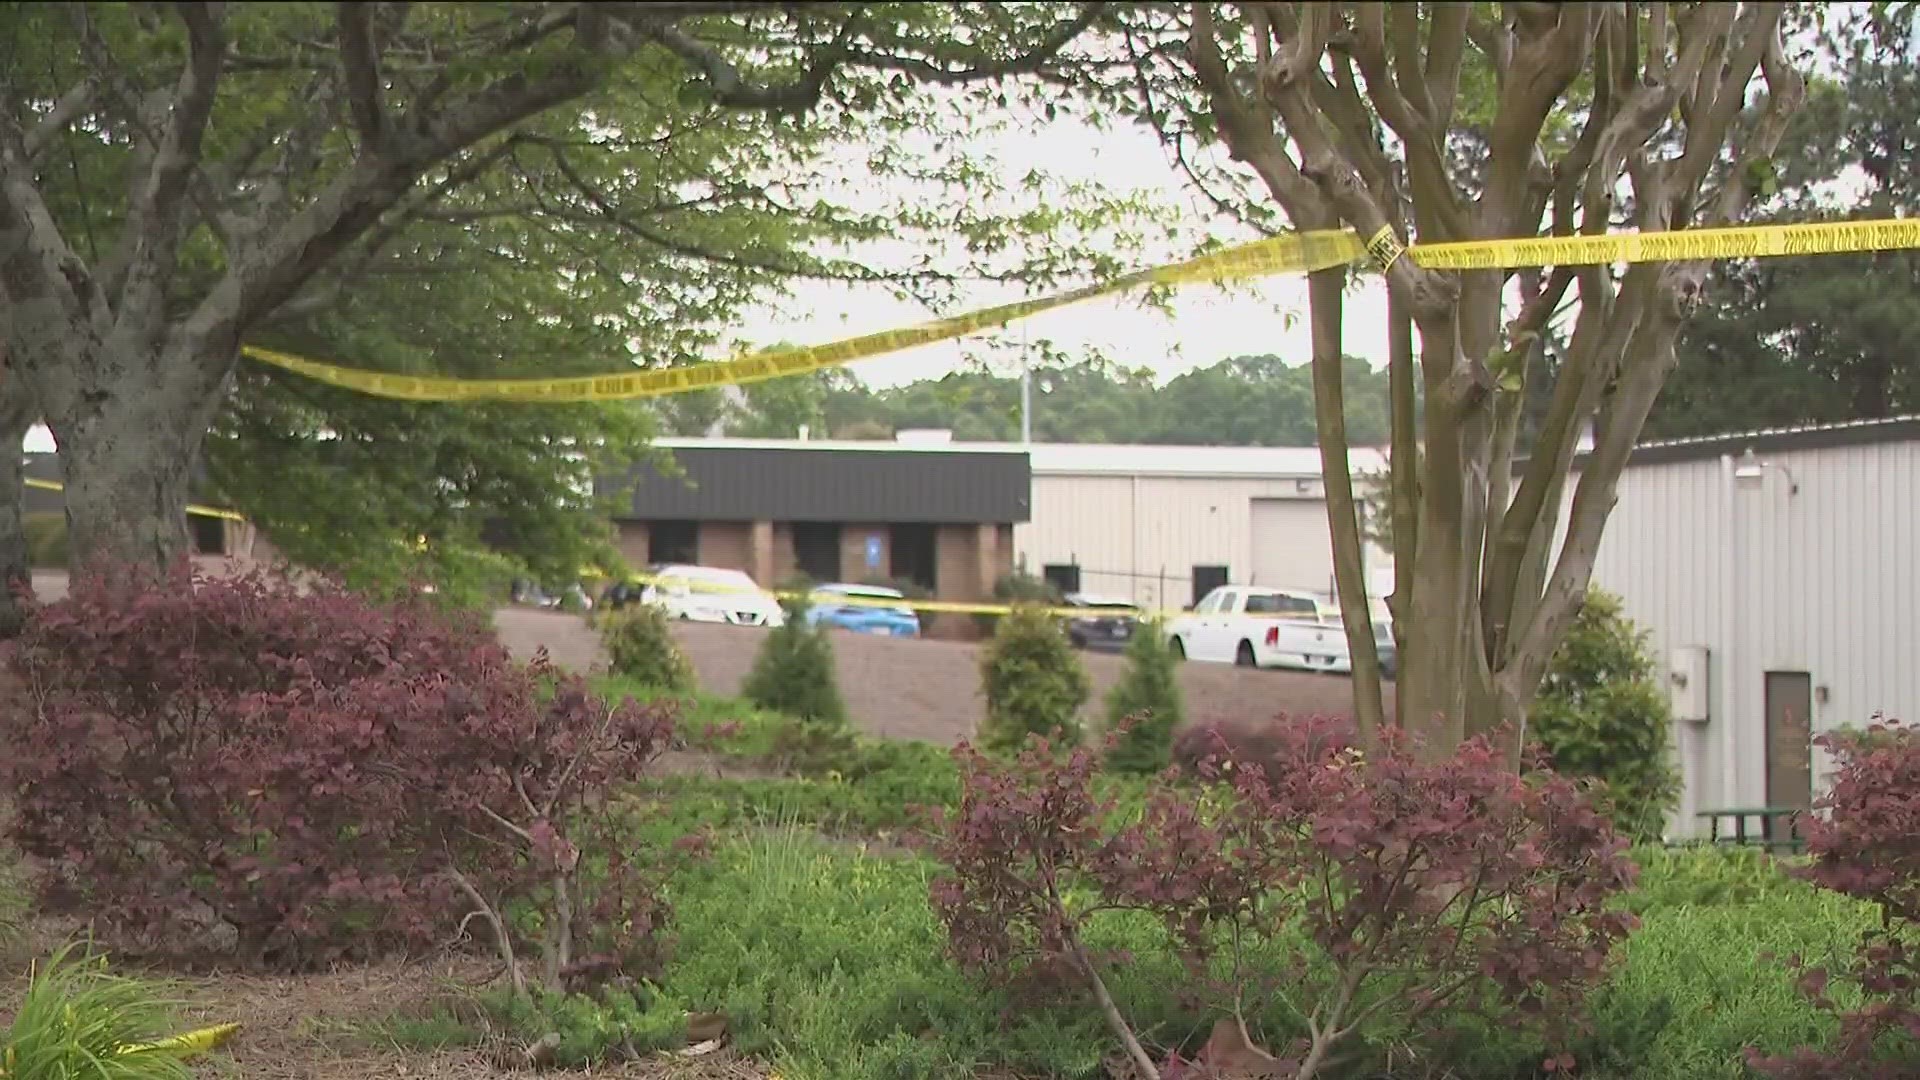 The sheriff's office said the shooting began in the parking lot of the Ernie Morris furniture store on Ivy Street West.